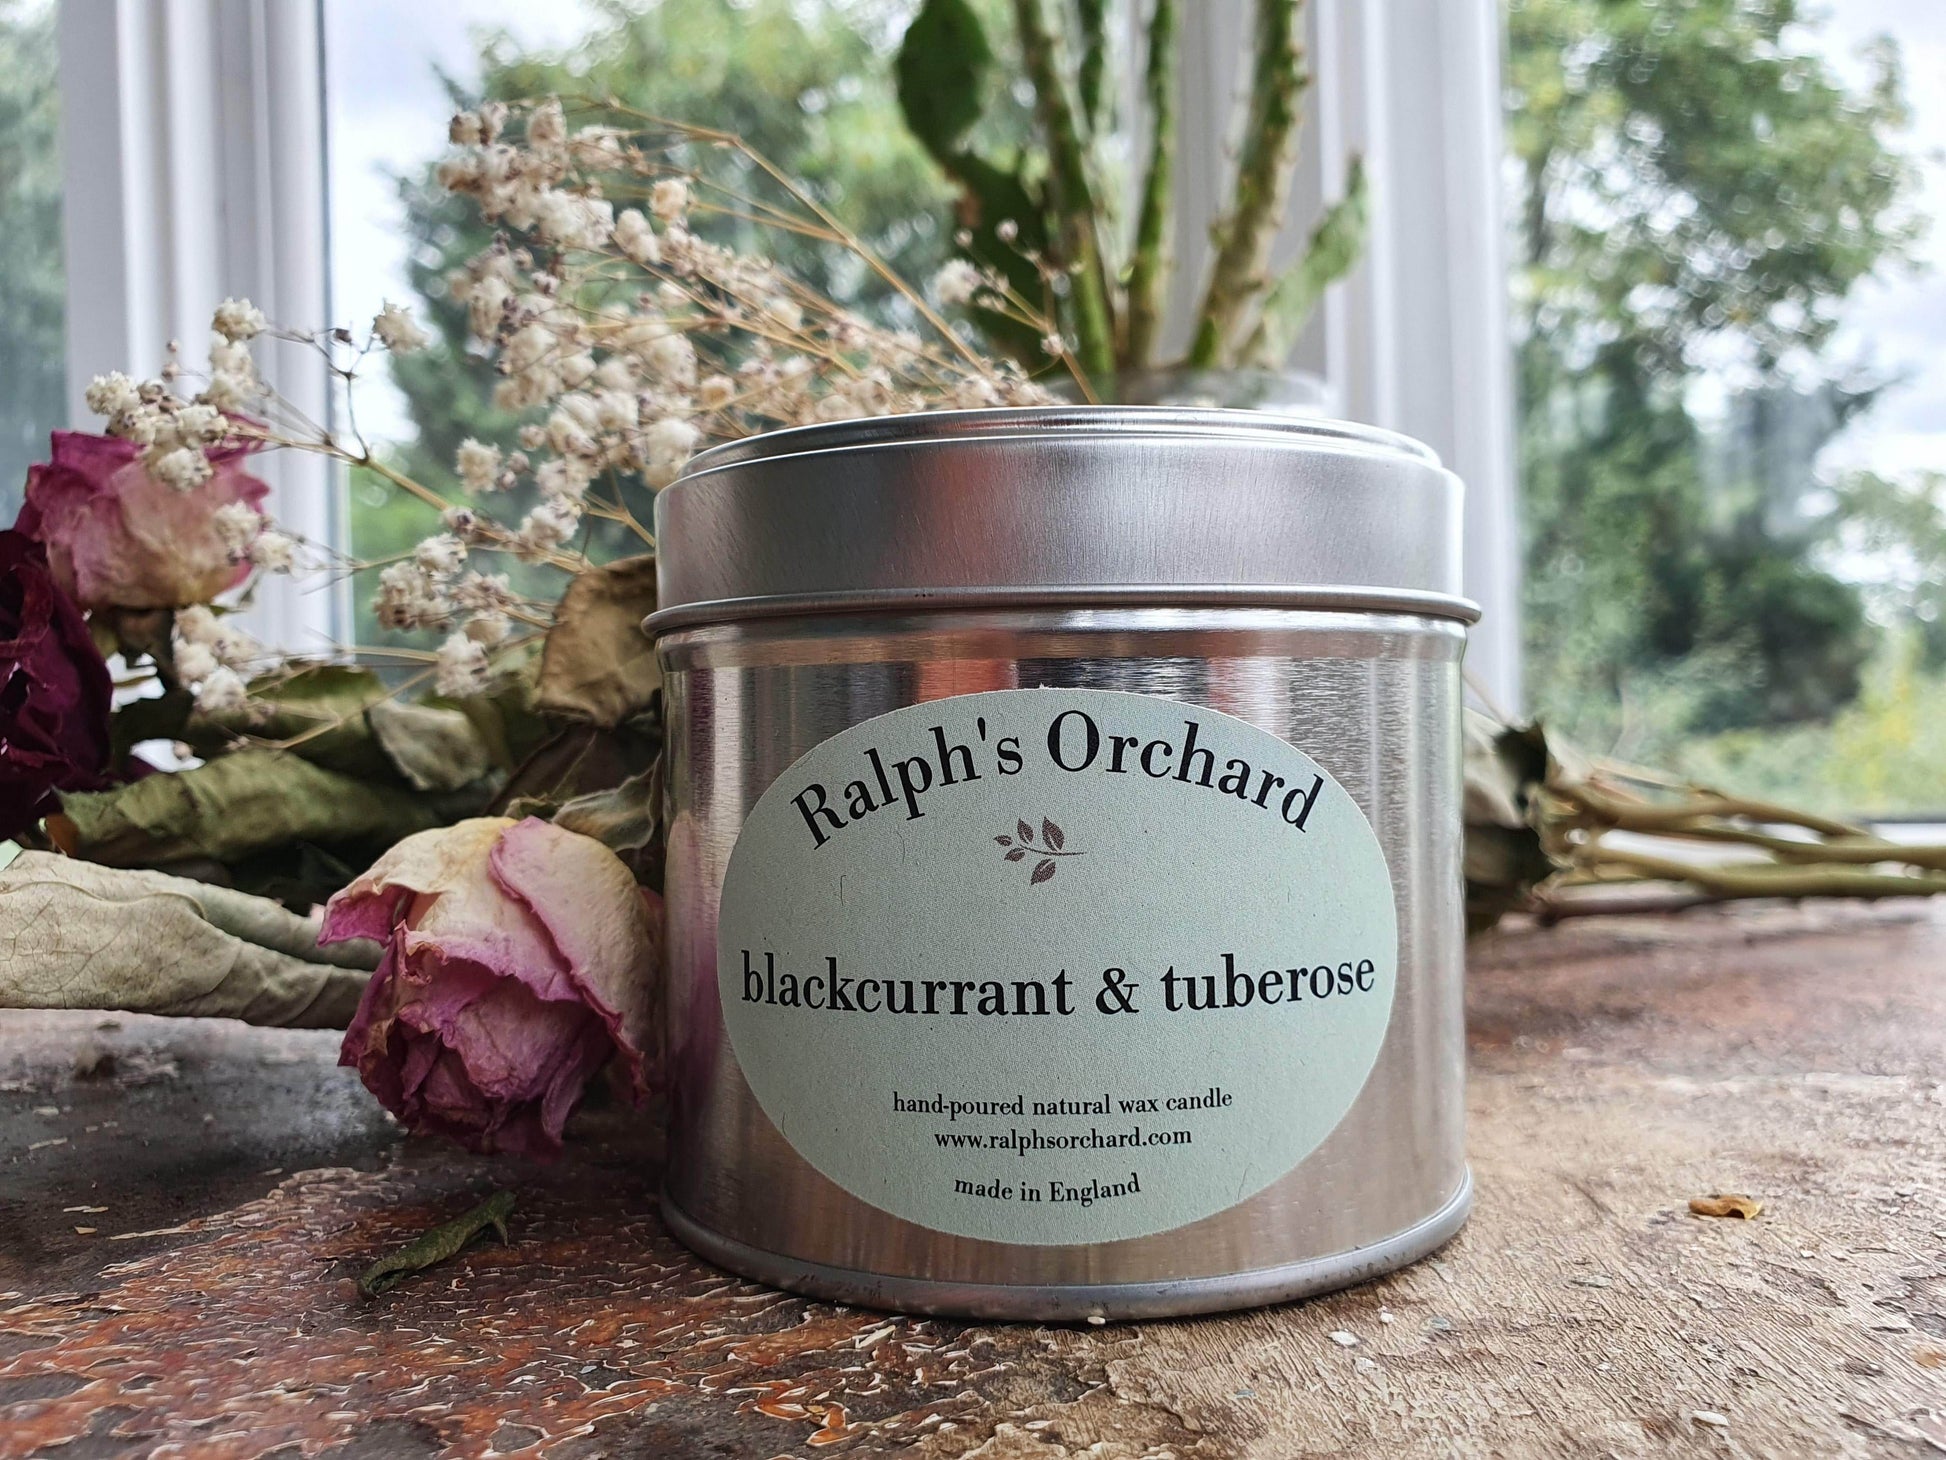 blackcurrant & tuberose candles in tin and glass